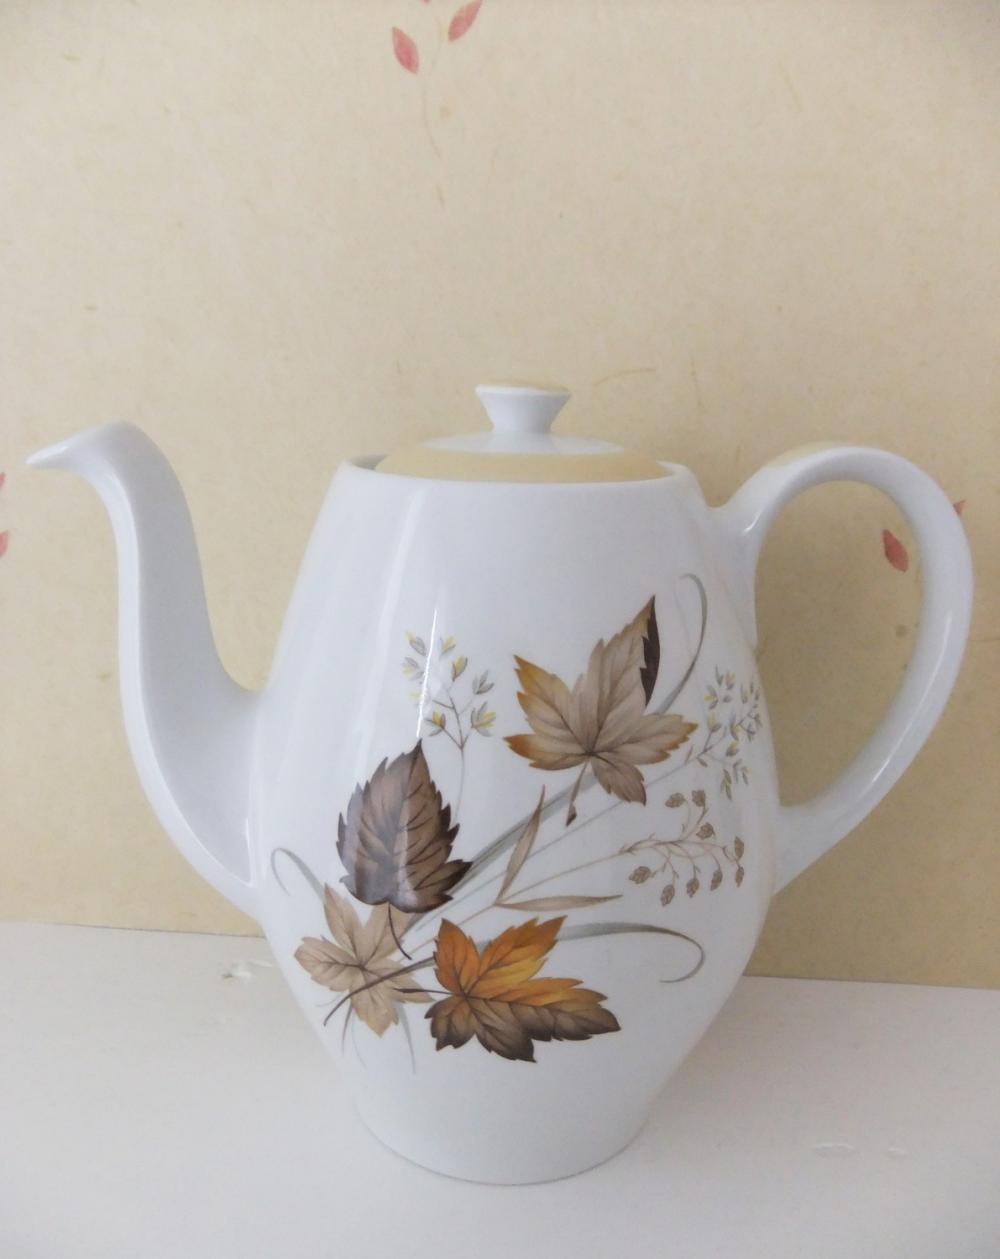 Alfred Meakin Coffee Pot From Glo White Range With Autumn Leaves